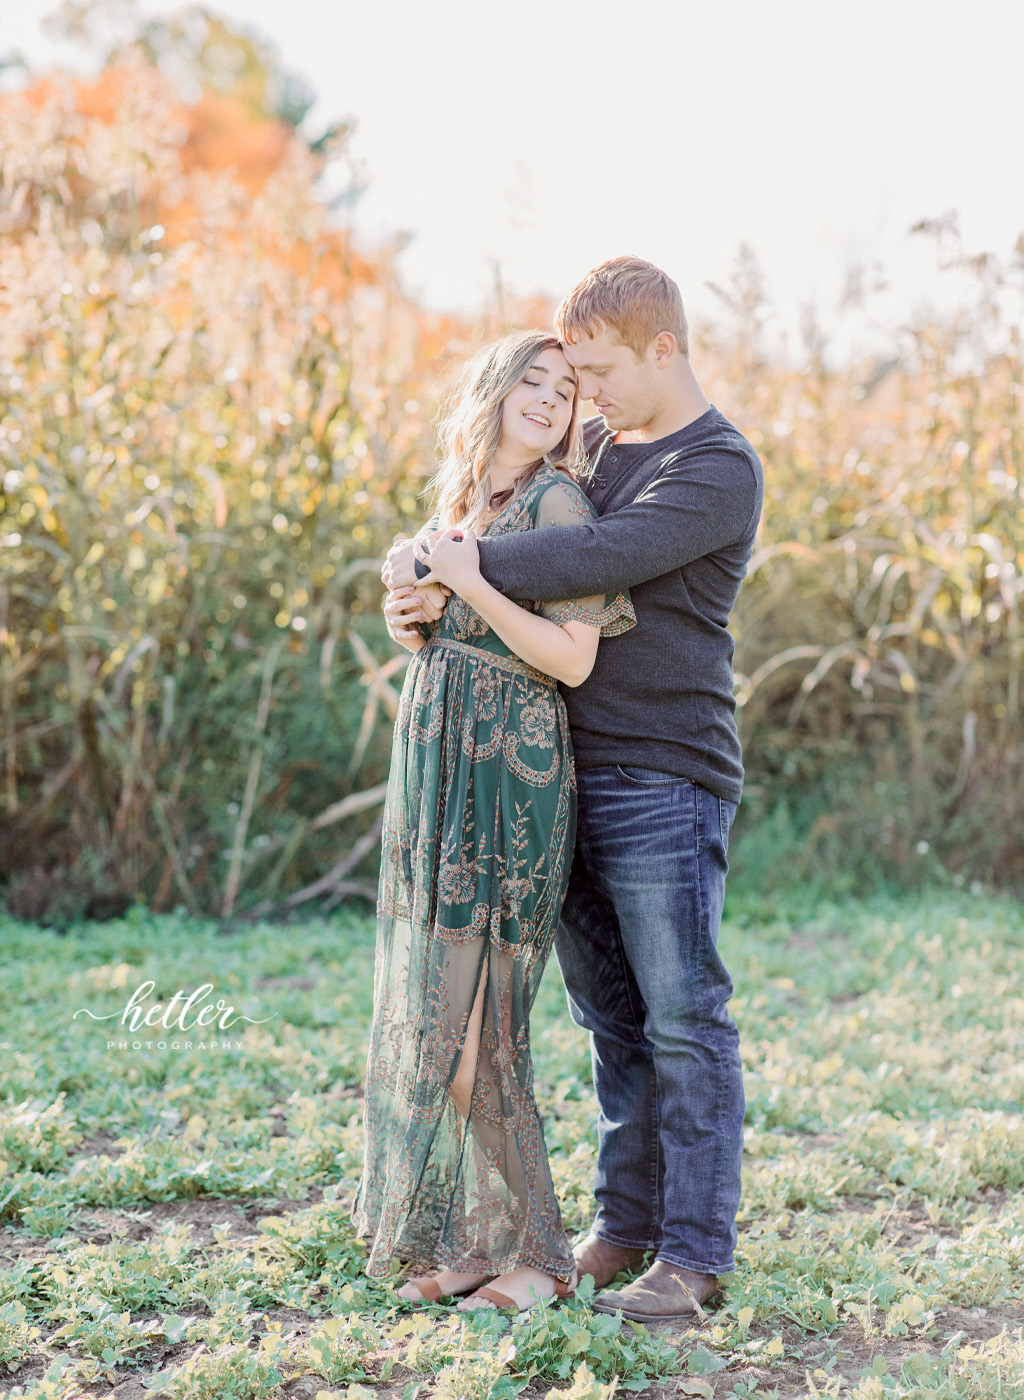 Grand Rapids fall engagement photo session with golden hour light at a lake and country location